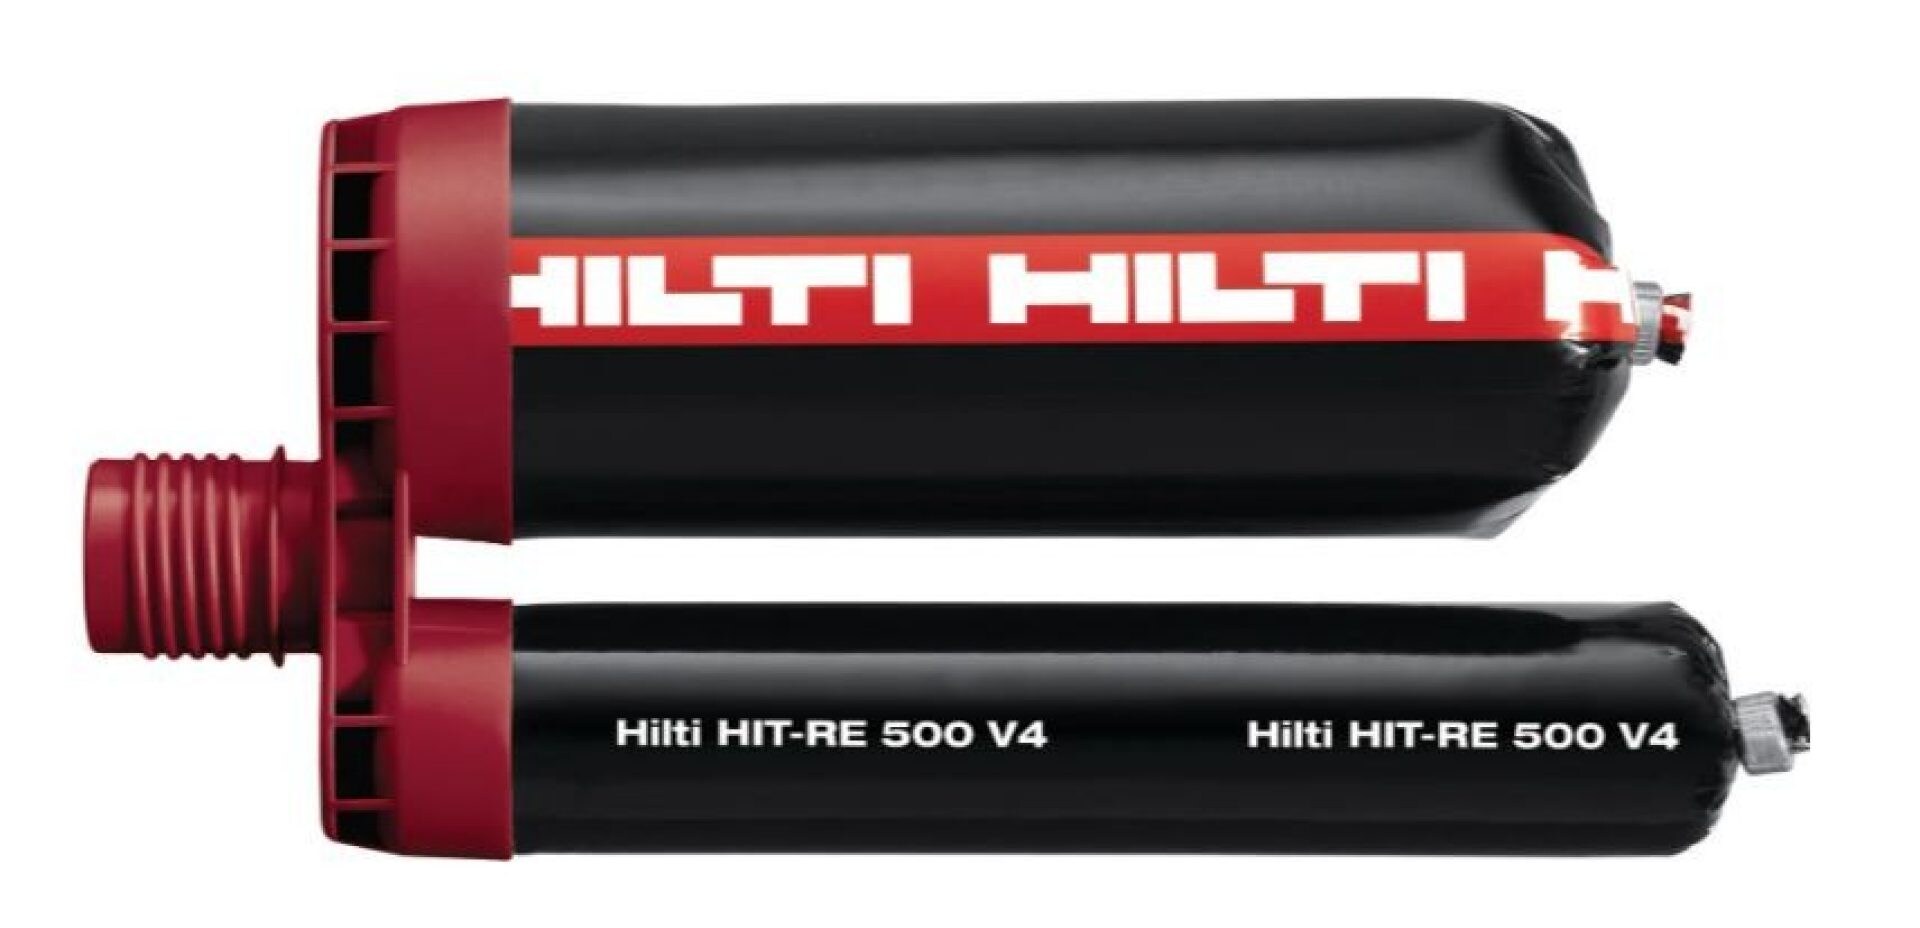 Hilti injectable mortar HIT-RE 500 V3